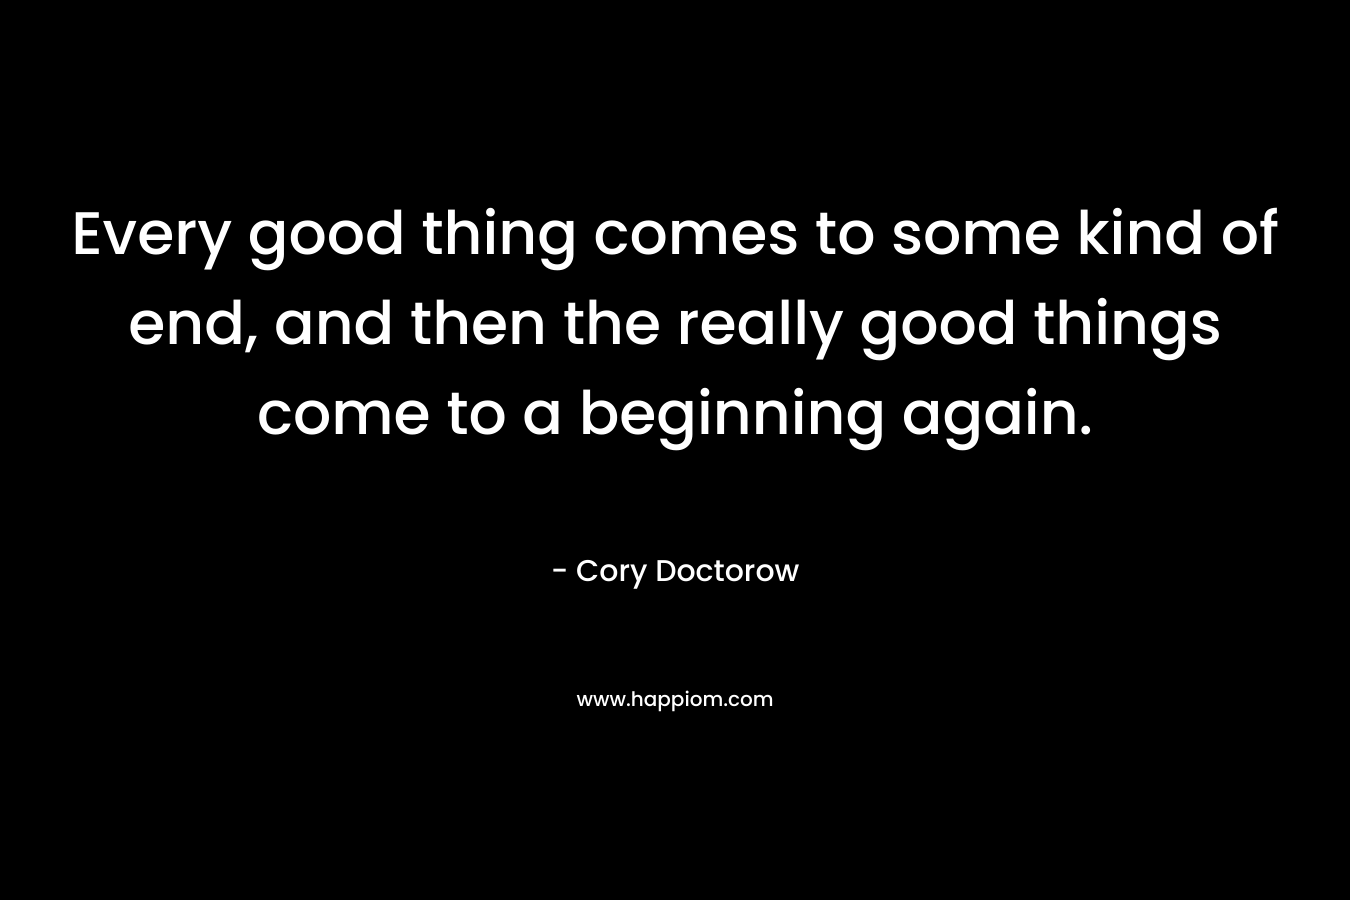 Every good thing comes to some kind of end, and then the really good things come to a beginning again. – Cory Doctorow